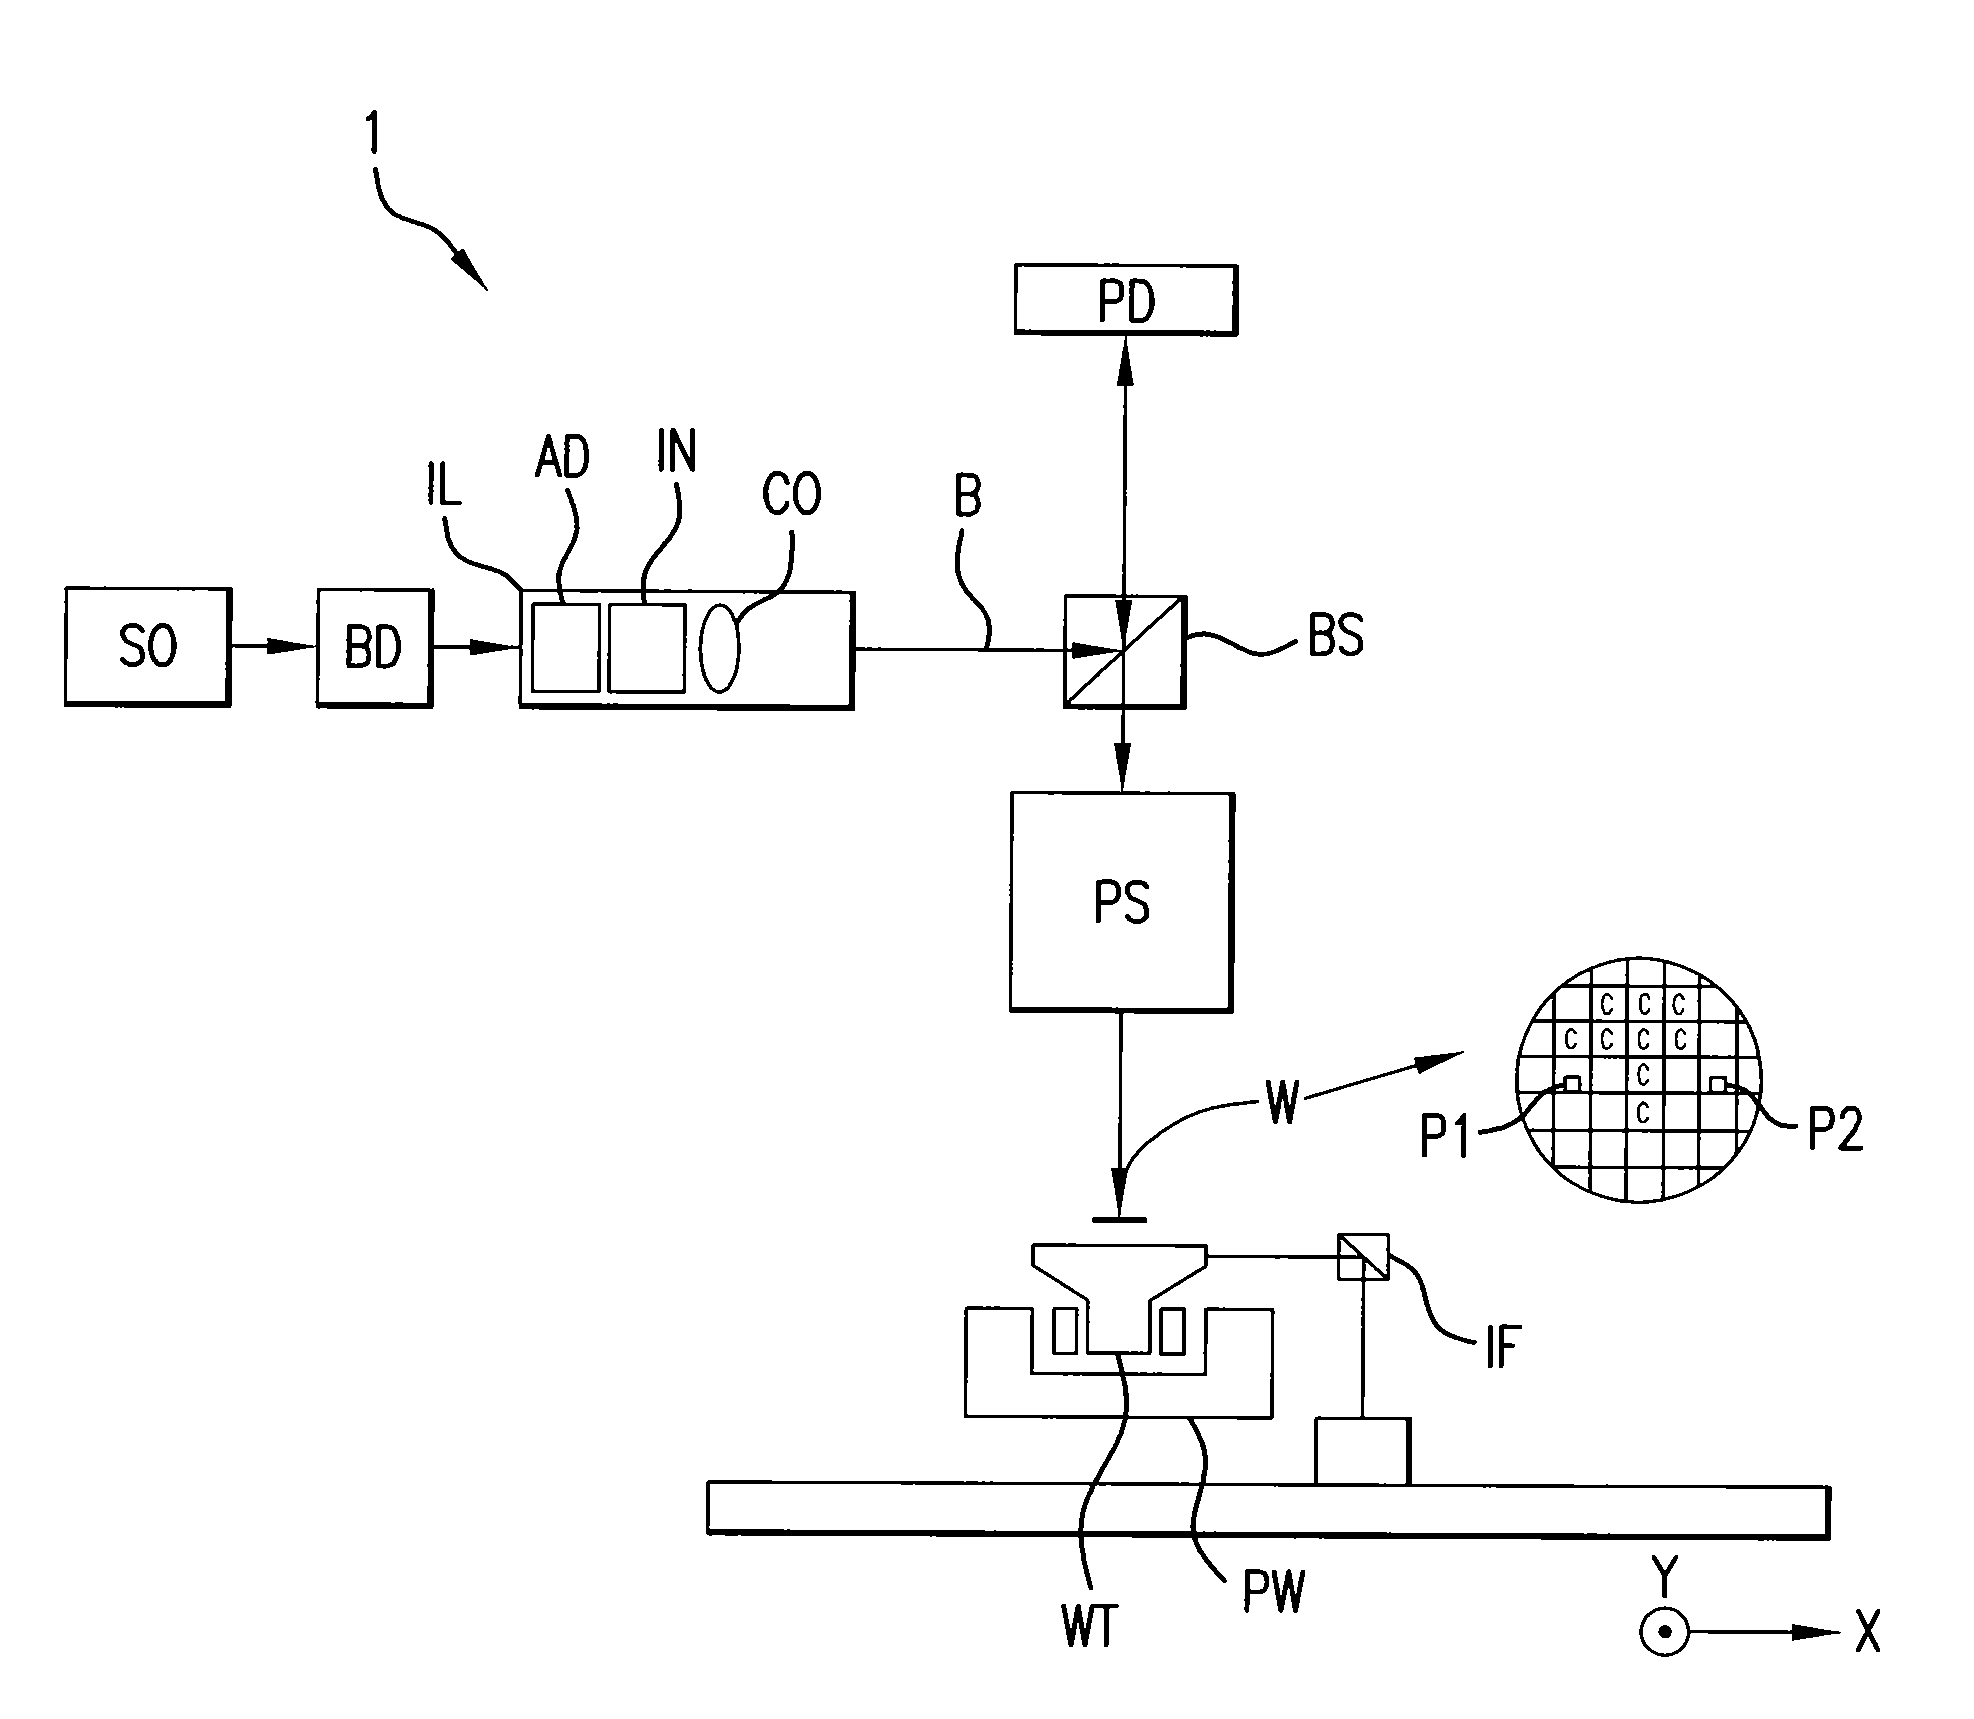 Synchronizing Timing of Multiple Physically or Logically Separated System Nodes